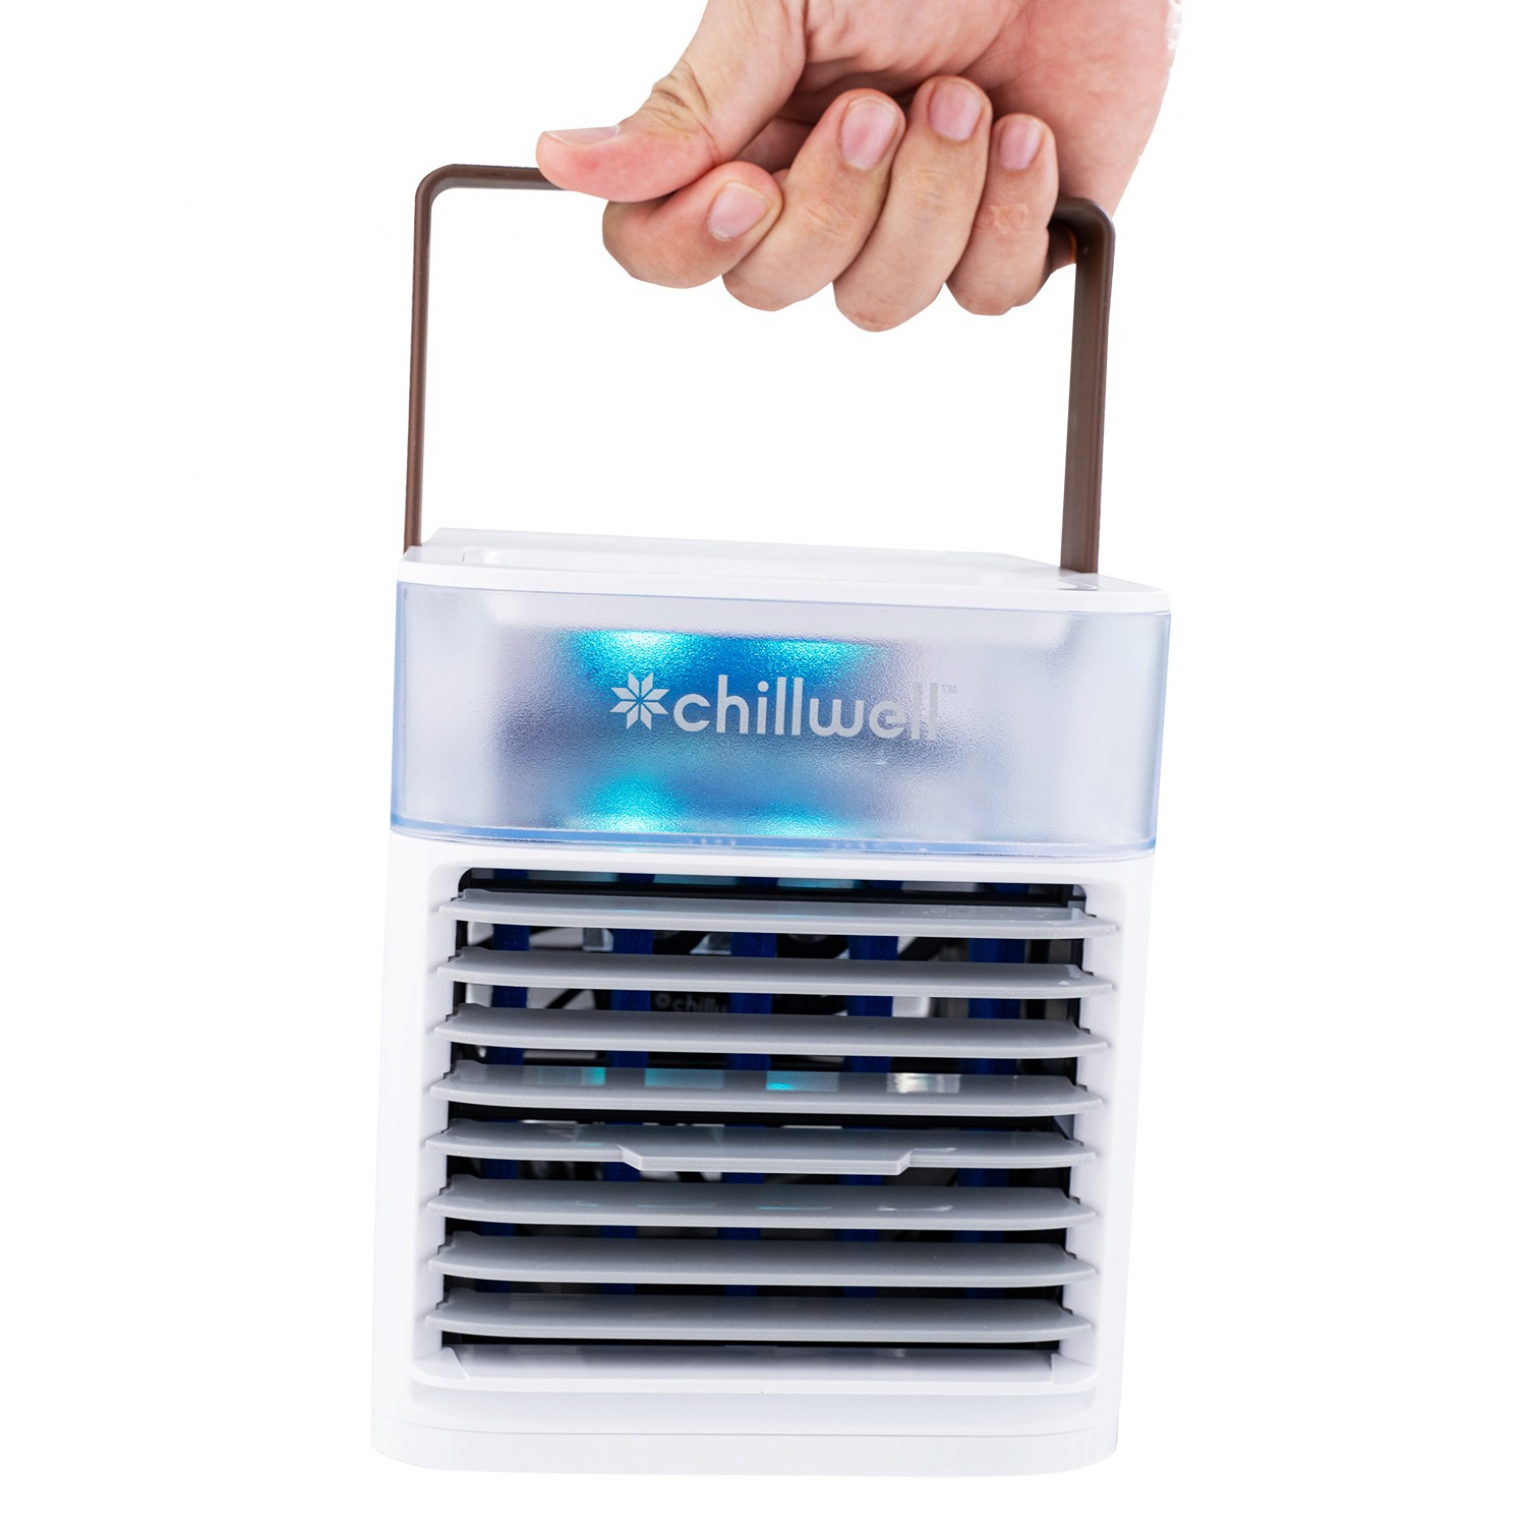 Chillwell AC Real Reviews